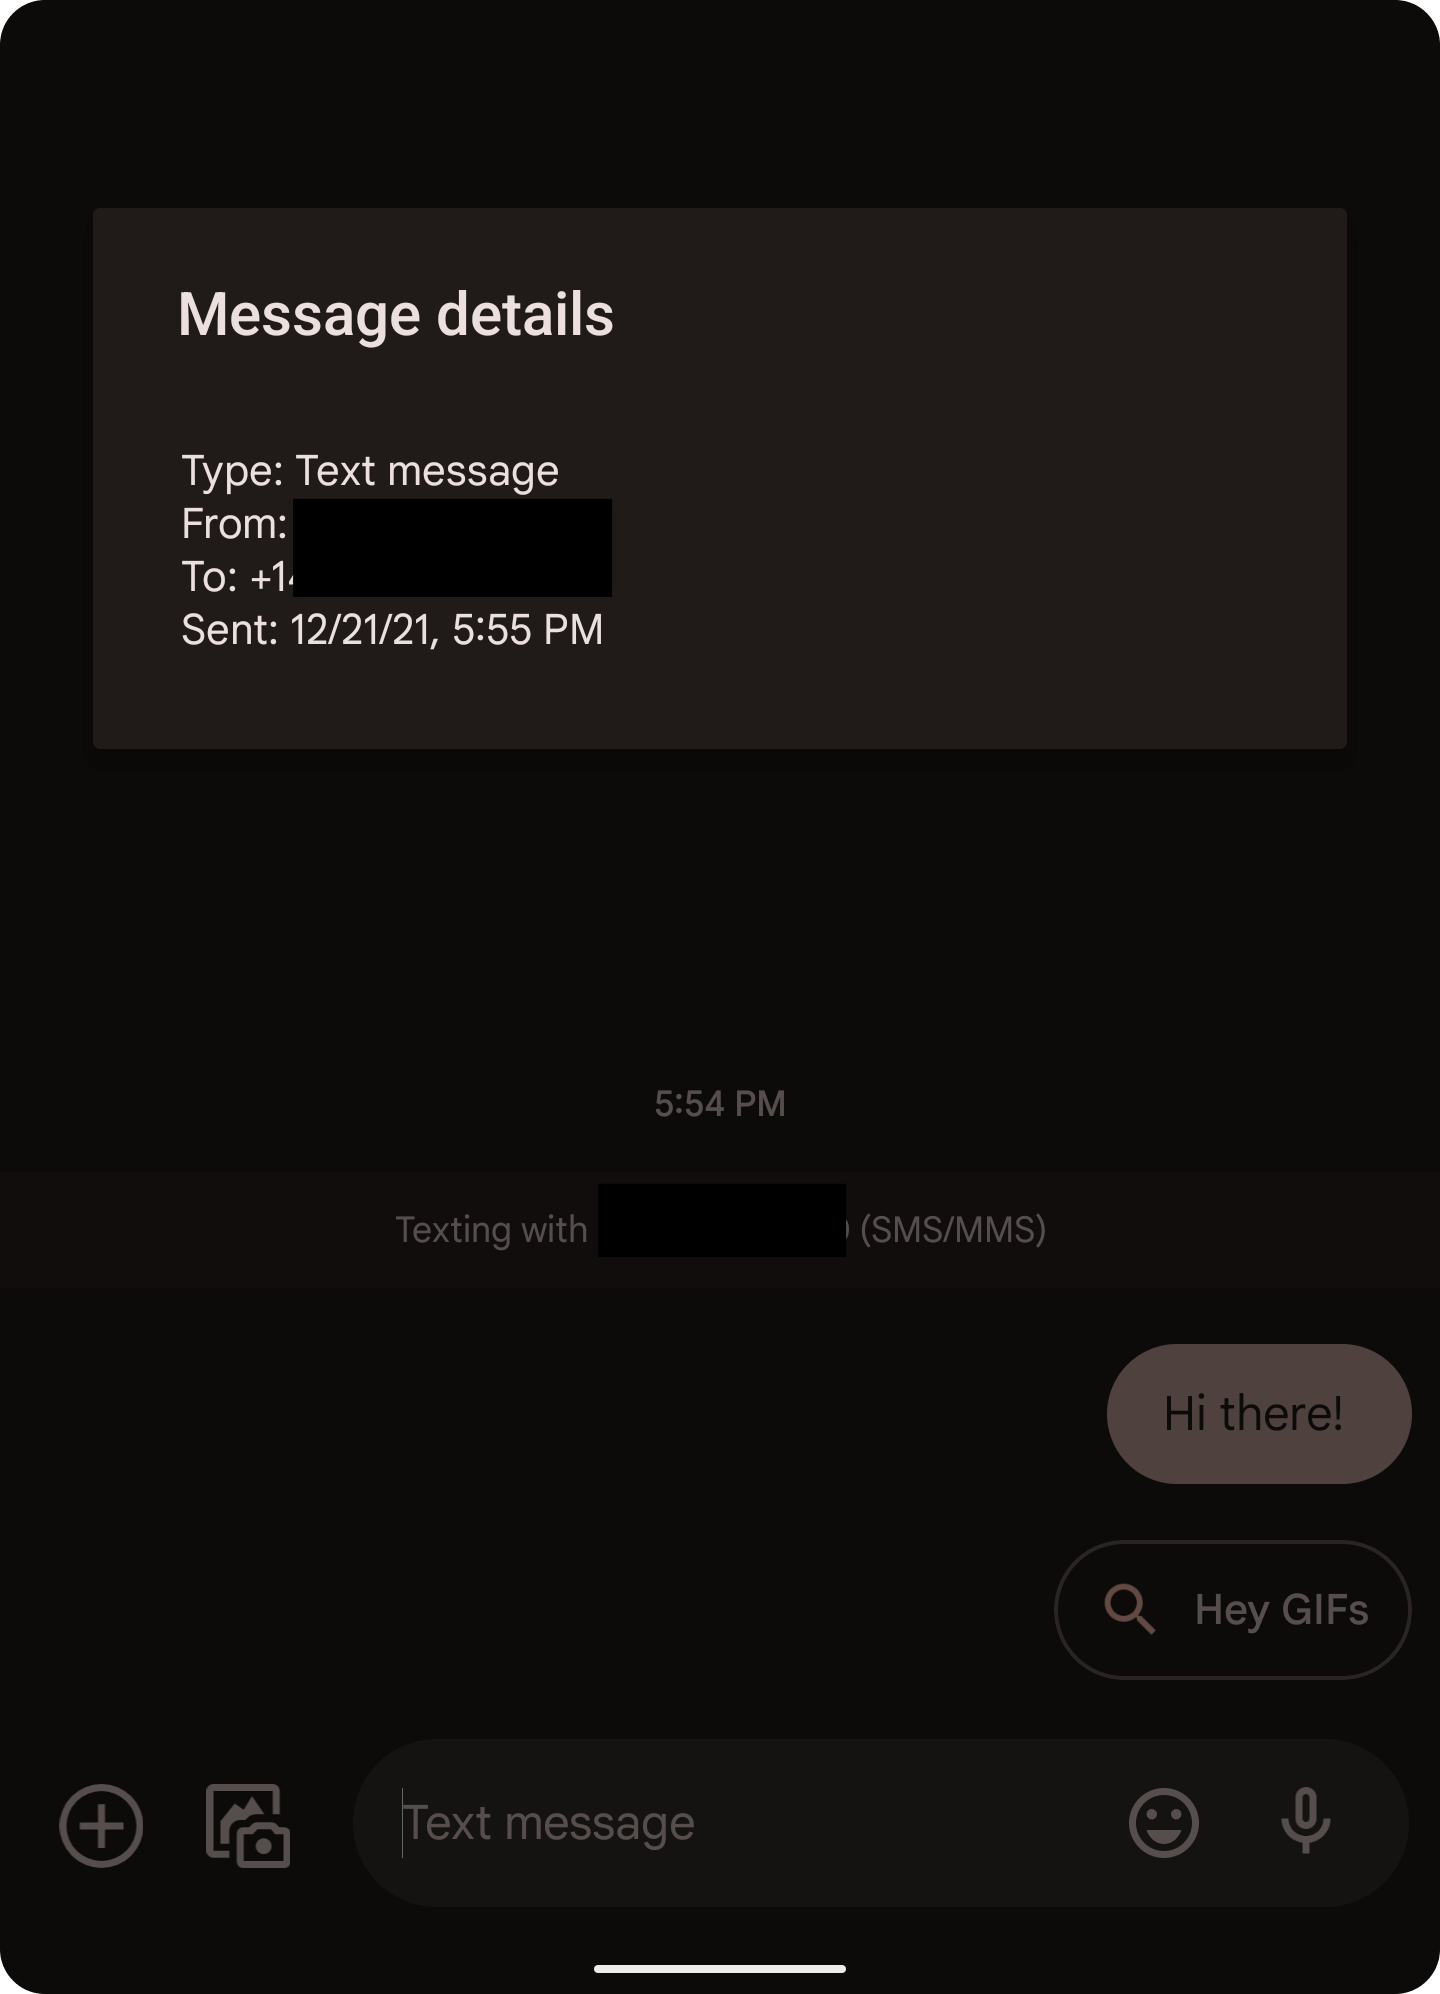 Android phone showing a message was sent